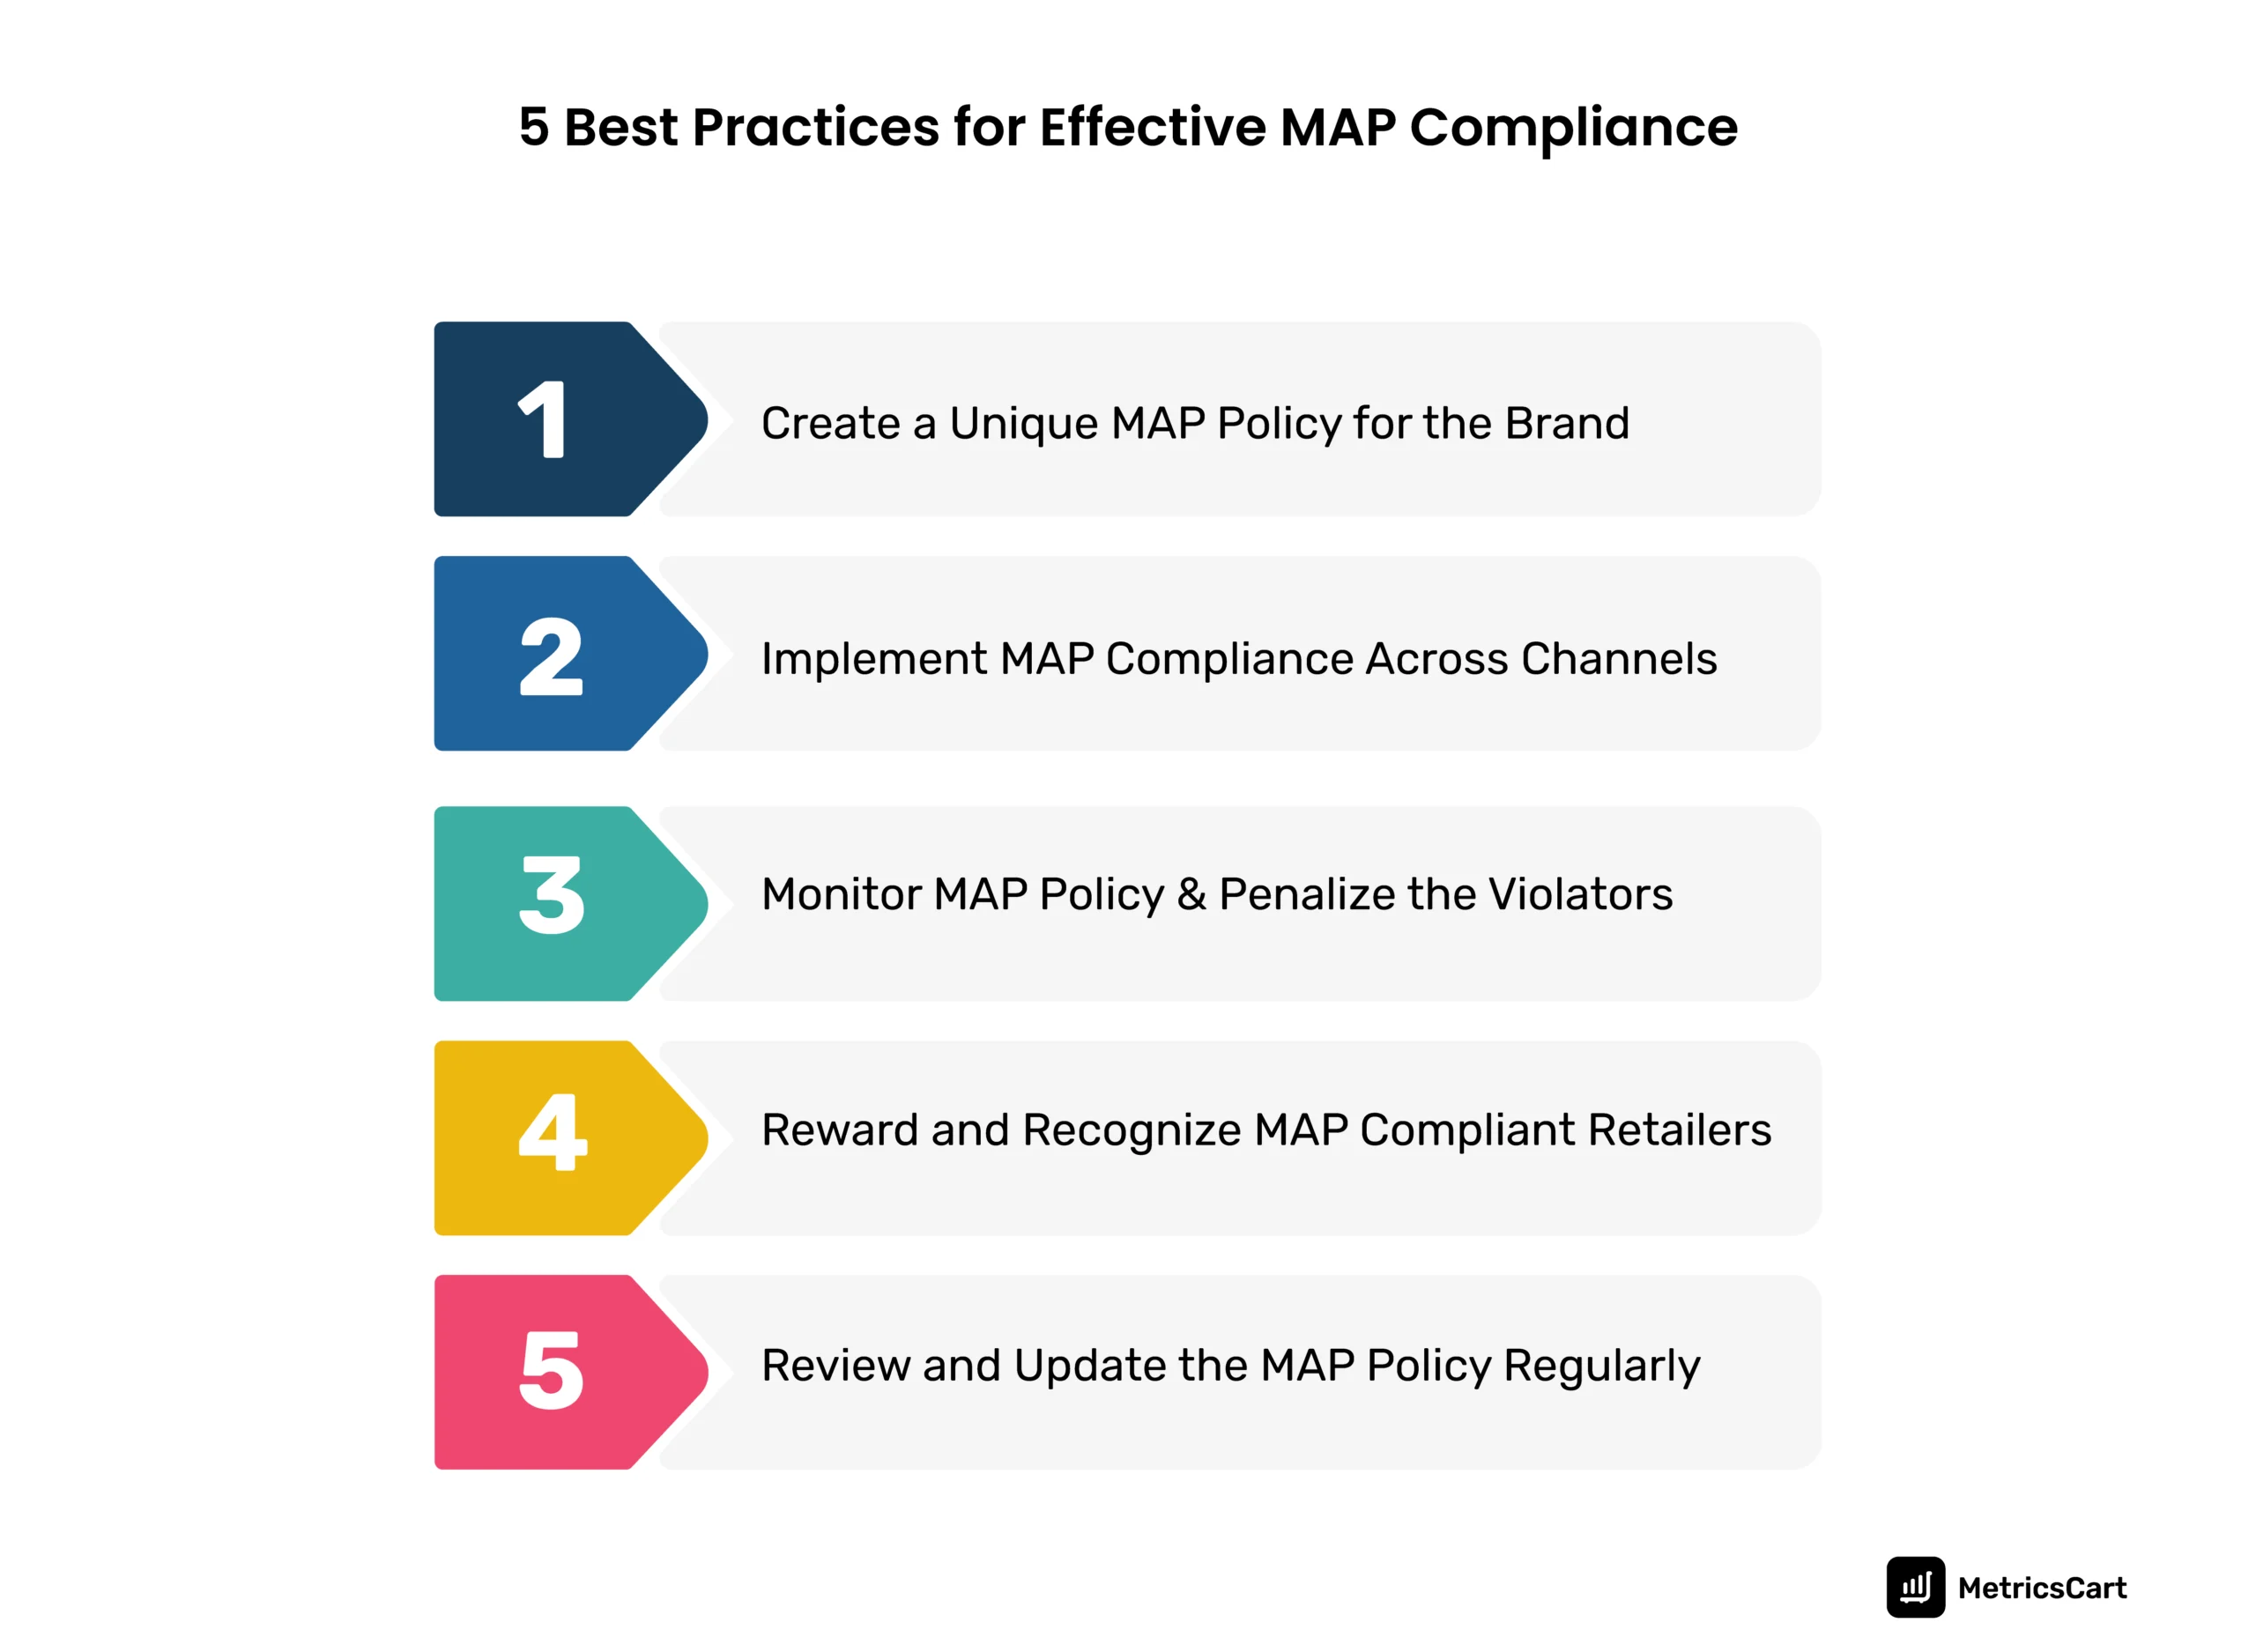 An infographic showcasing the best practices for effective MAP compliance